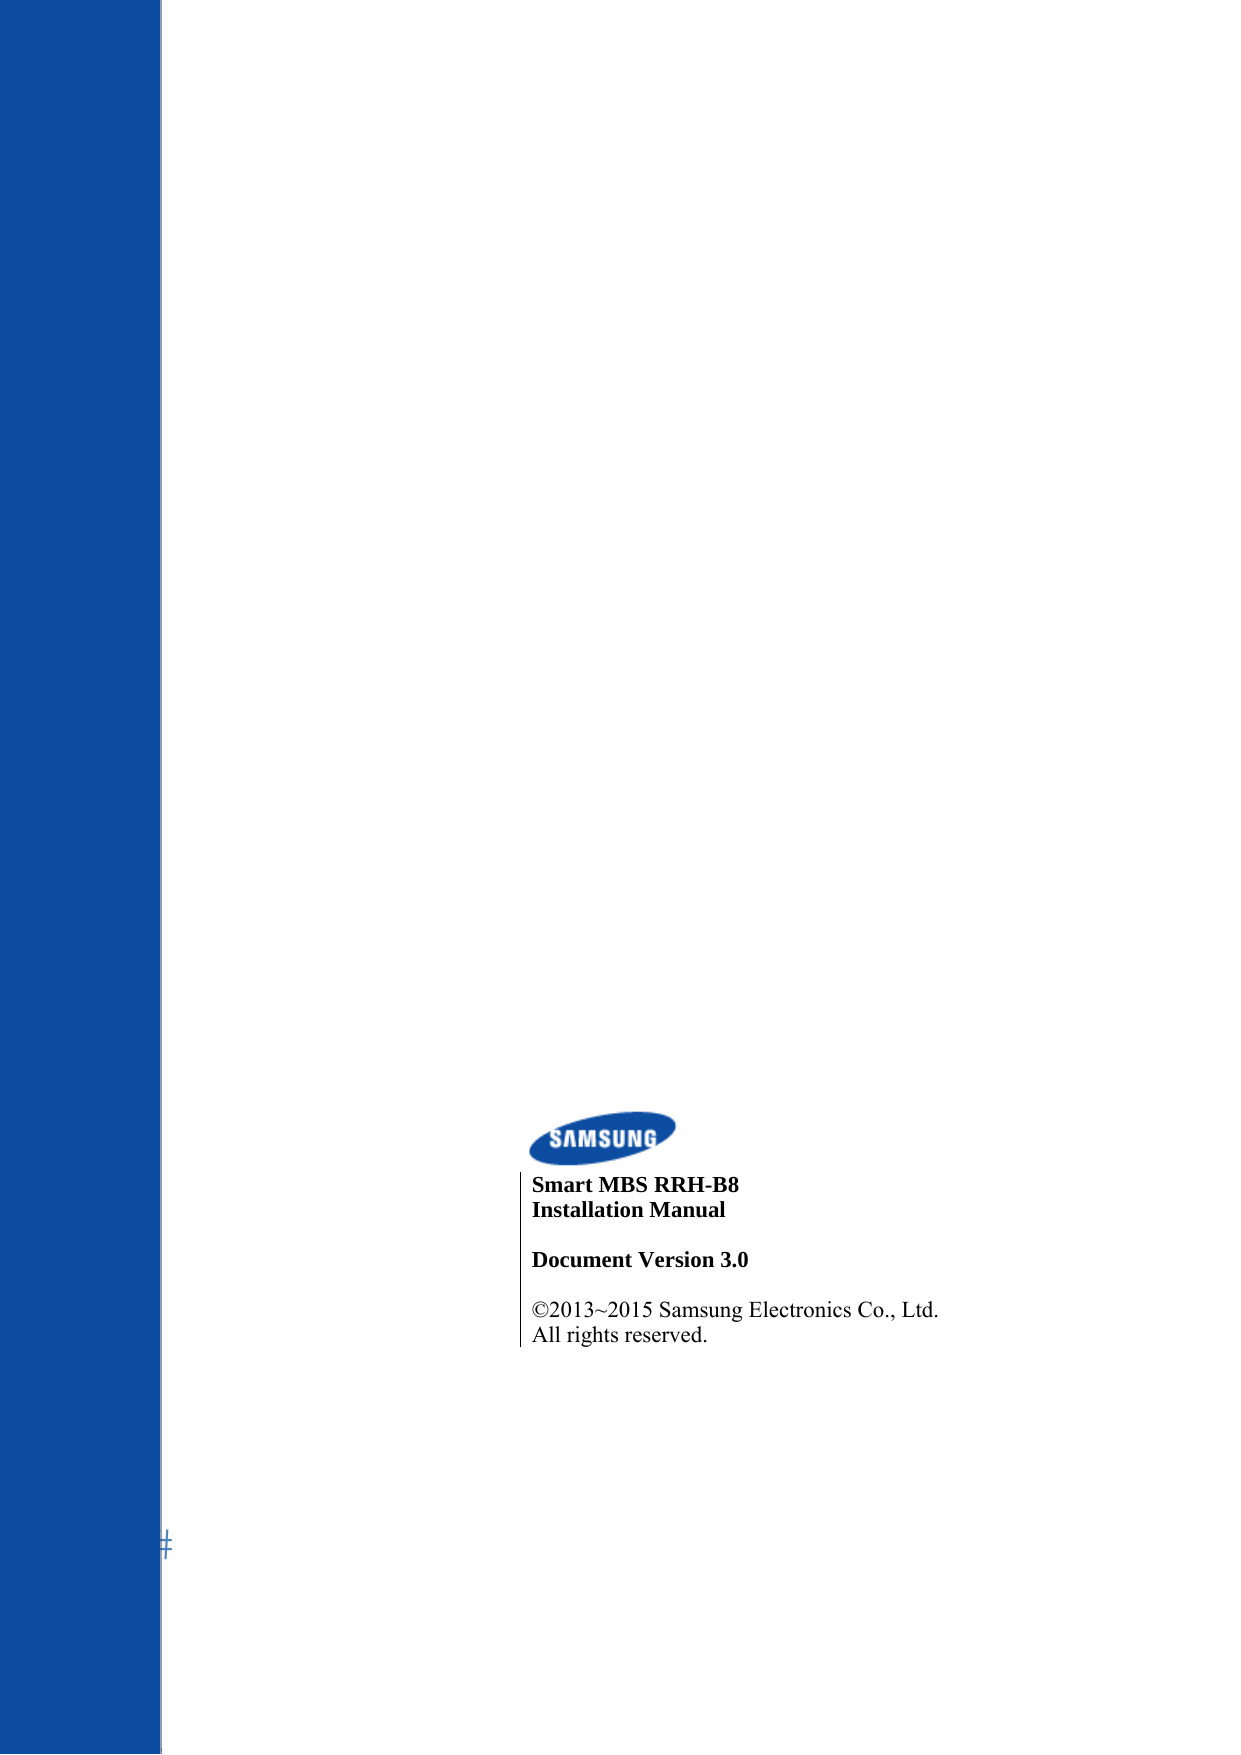         Smart MBS RRH-B8Installation Manual Document Version 3.0    ©2013~2015 Samsung Electronics Co., Ltd. All rights reserved.